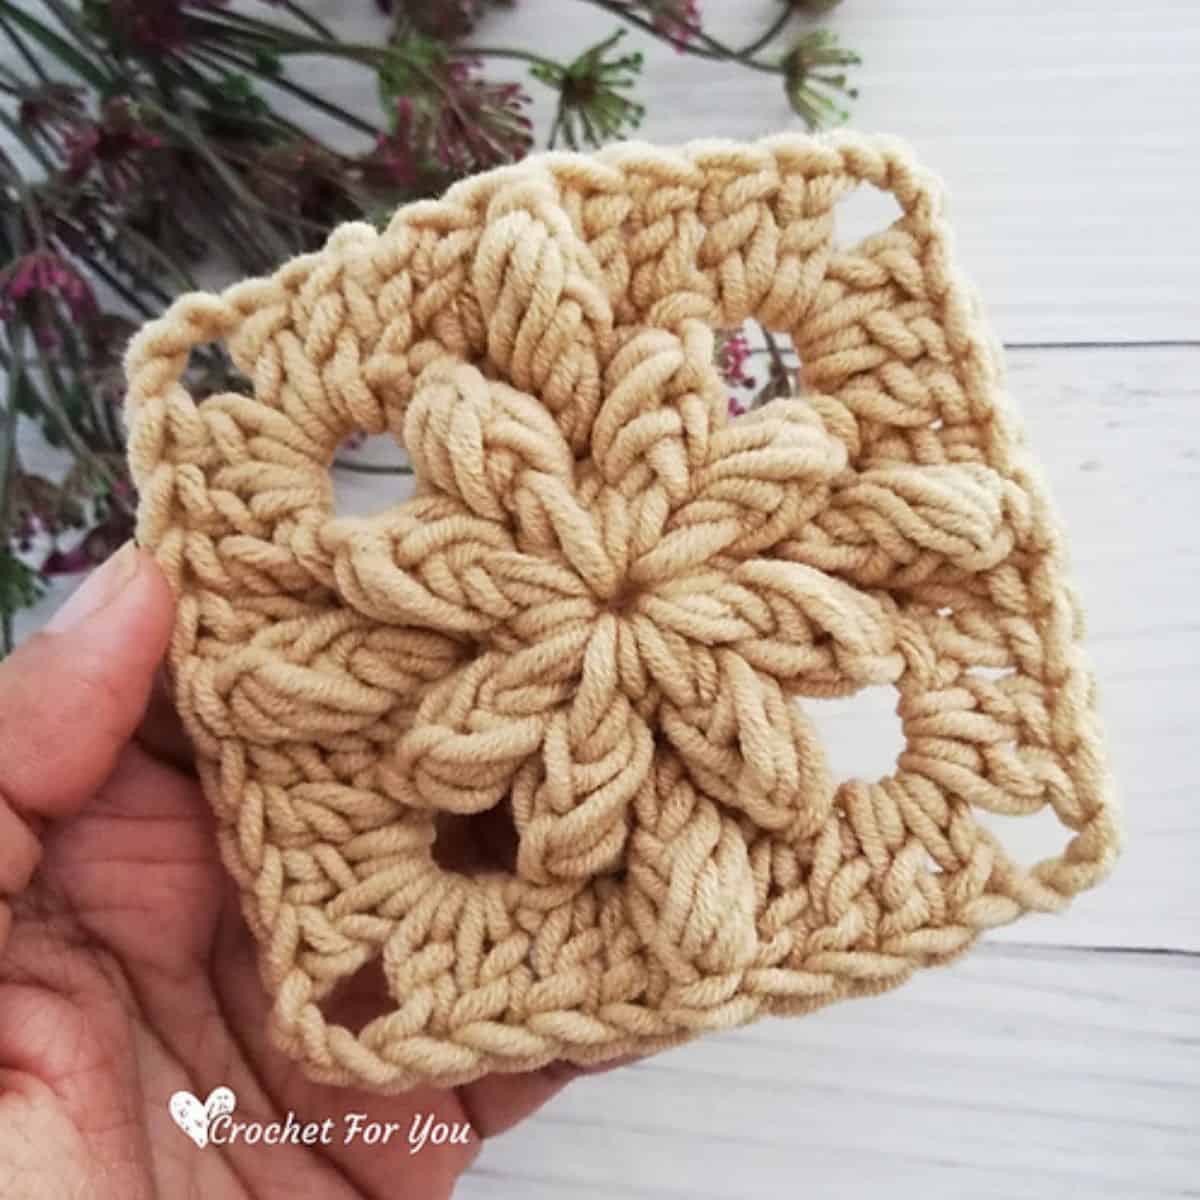 small crochet granny square with a raised crochet flower motif in the center